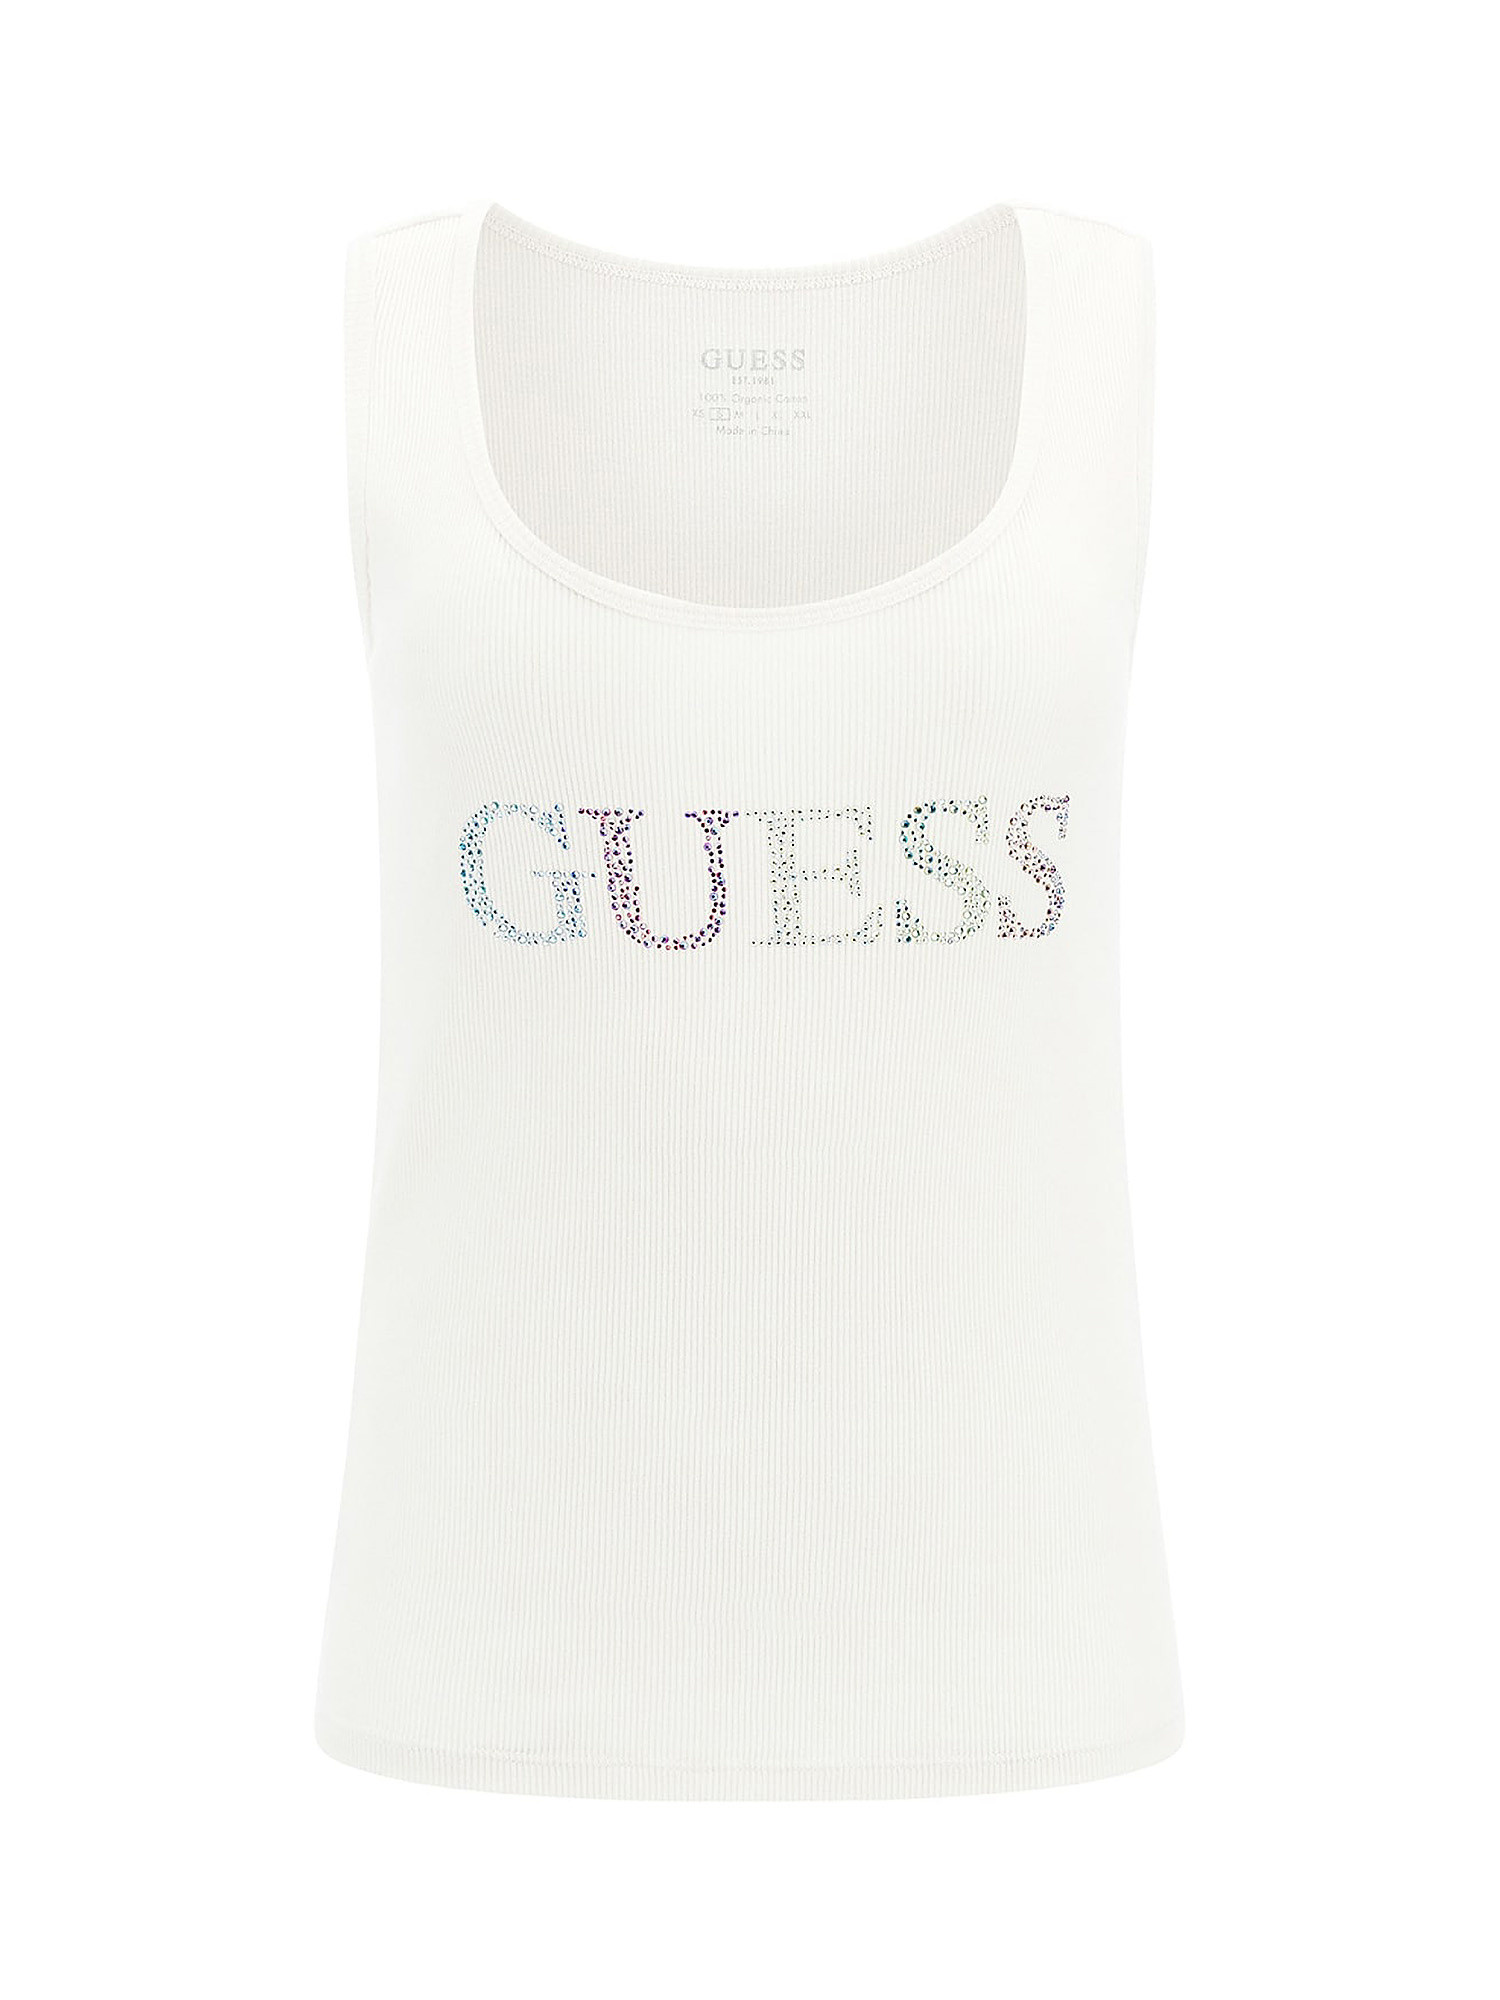 GUESS - Cotton tank top with logo, White, large image number 0